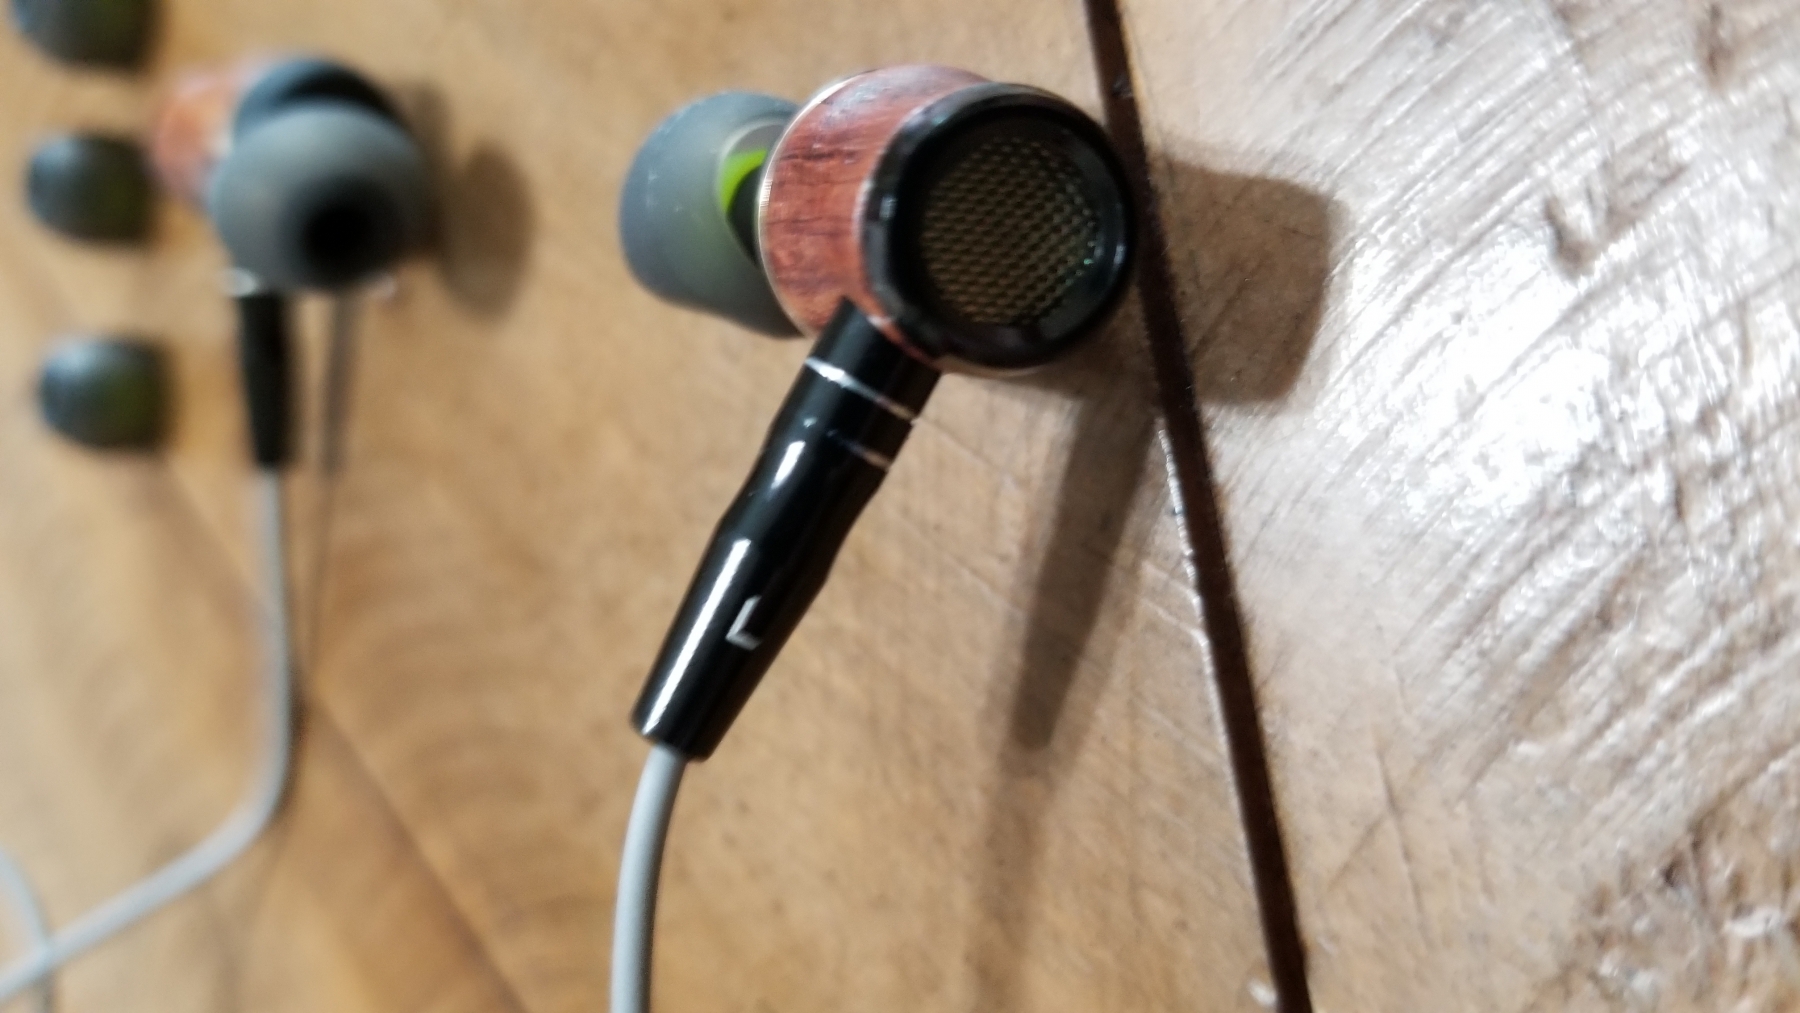 Another great set of earbuds